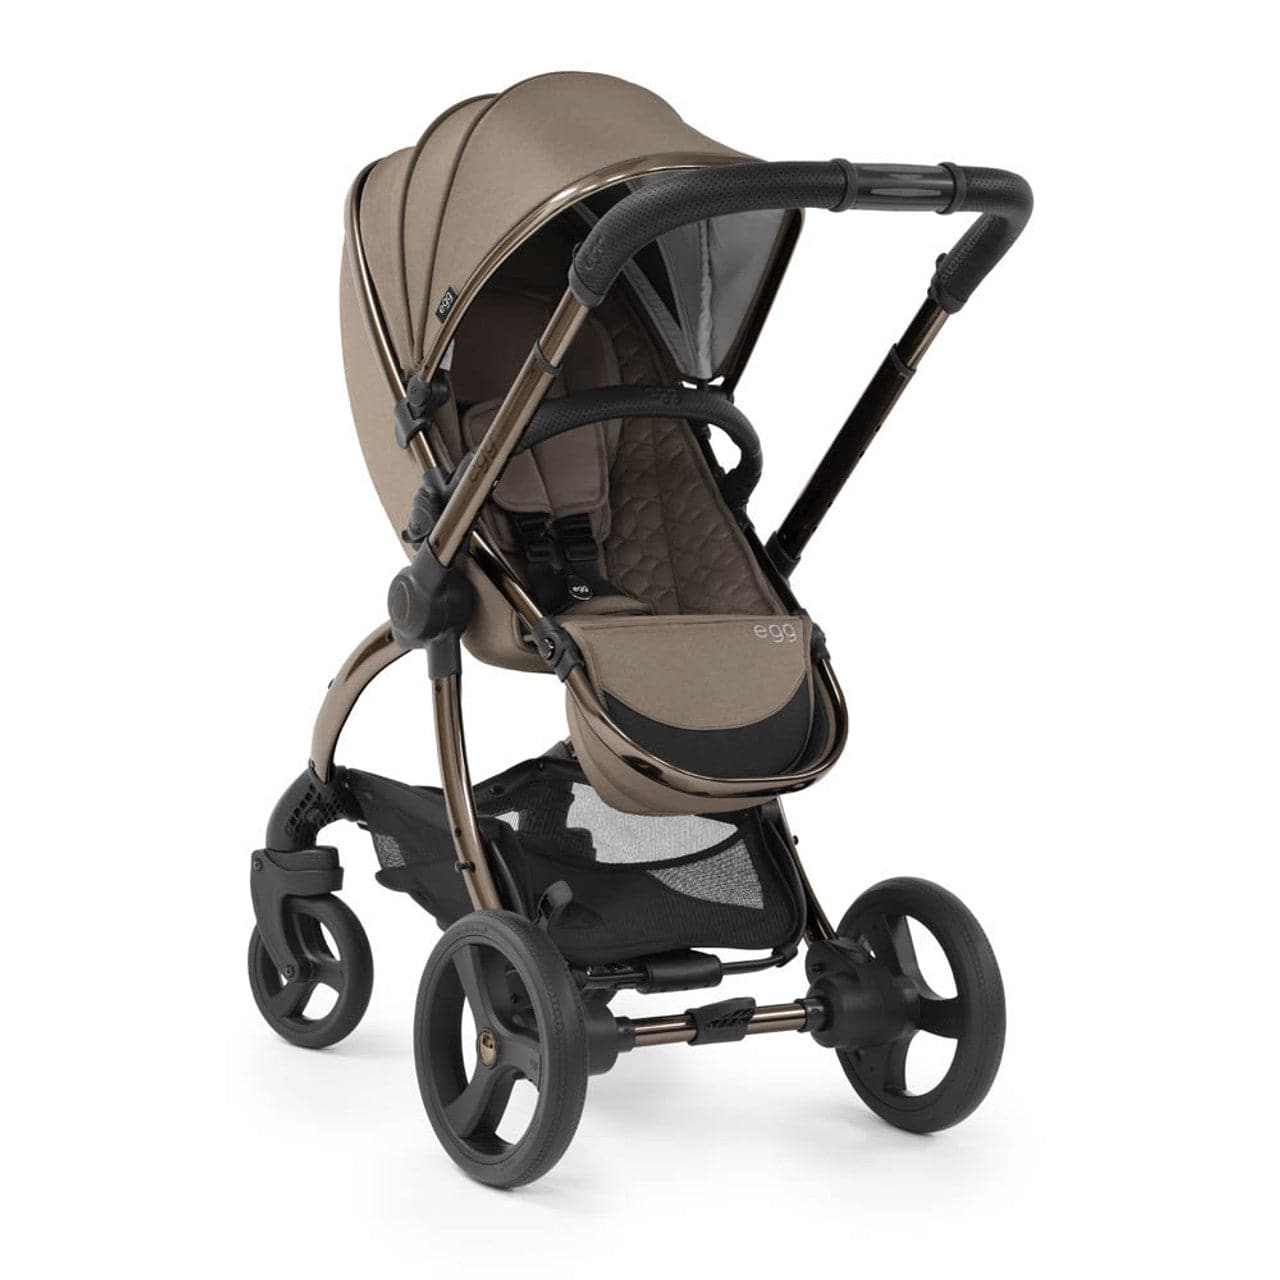 Egg® 2 Pushchair With Seat Liner - Mink - For Your Little One